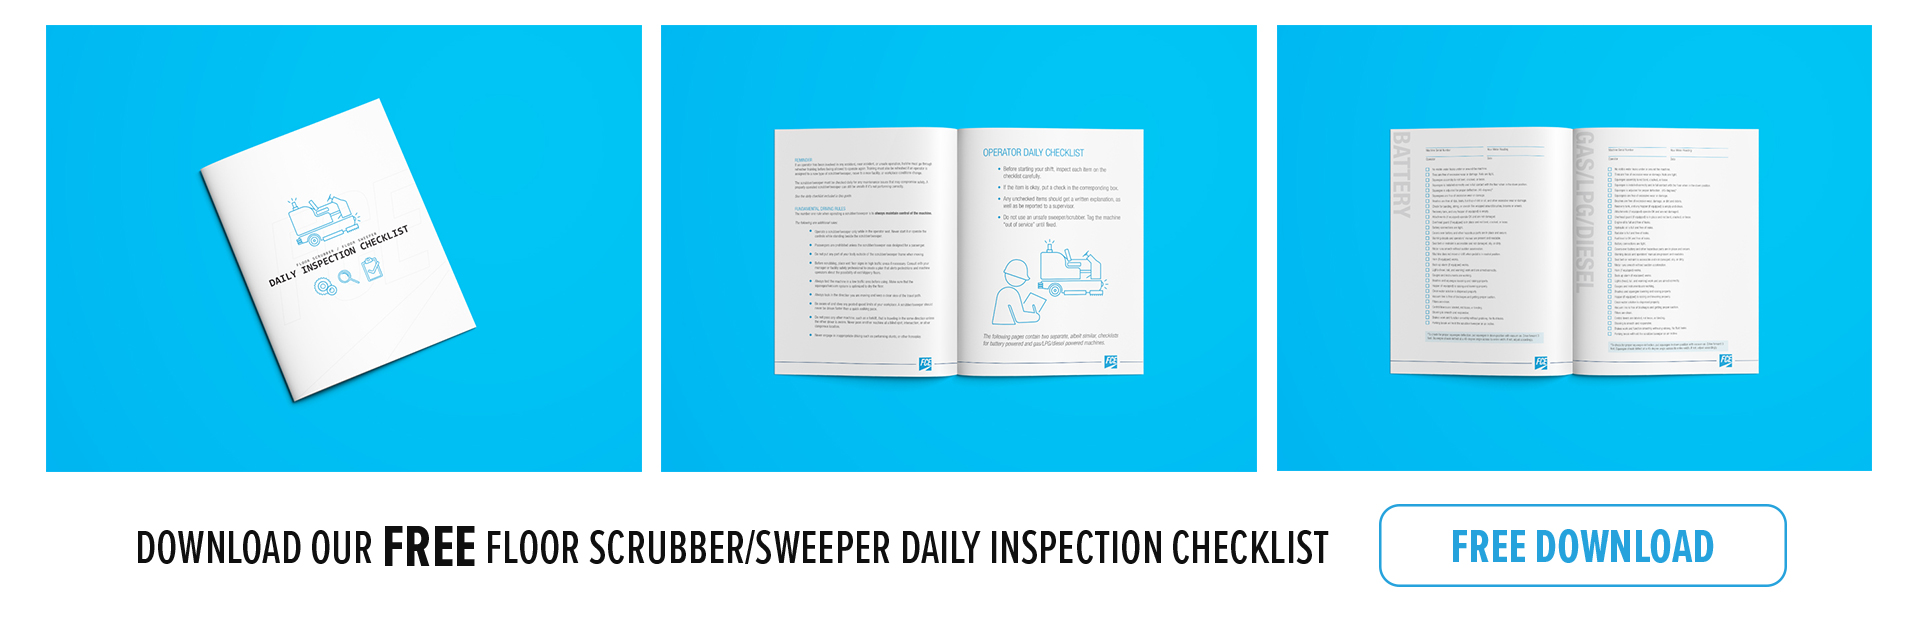 Daily Inspection Checklist for Floor Scrubber or Floor Sweeper, including Tennant, Factory Cat, Powerboss, Advance, and more.